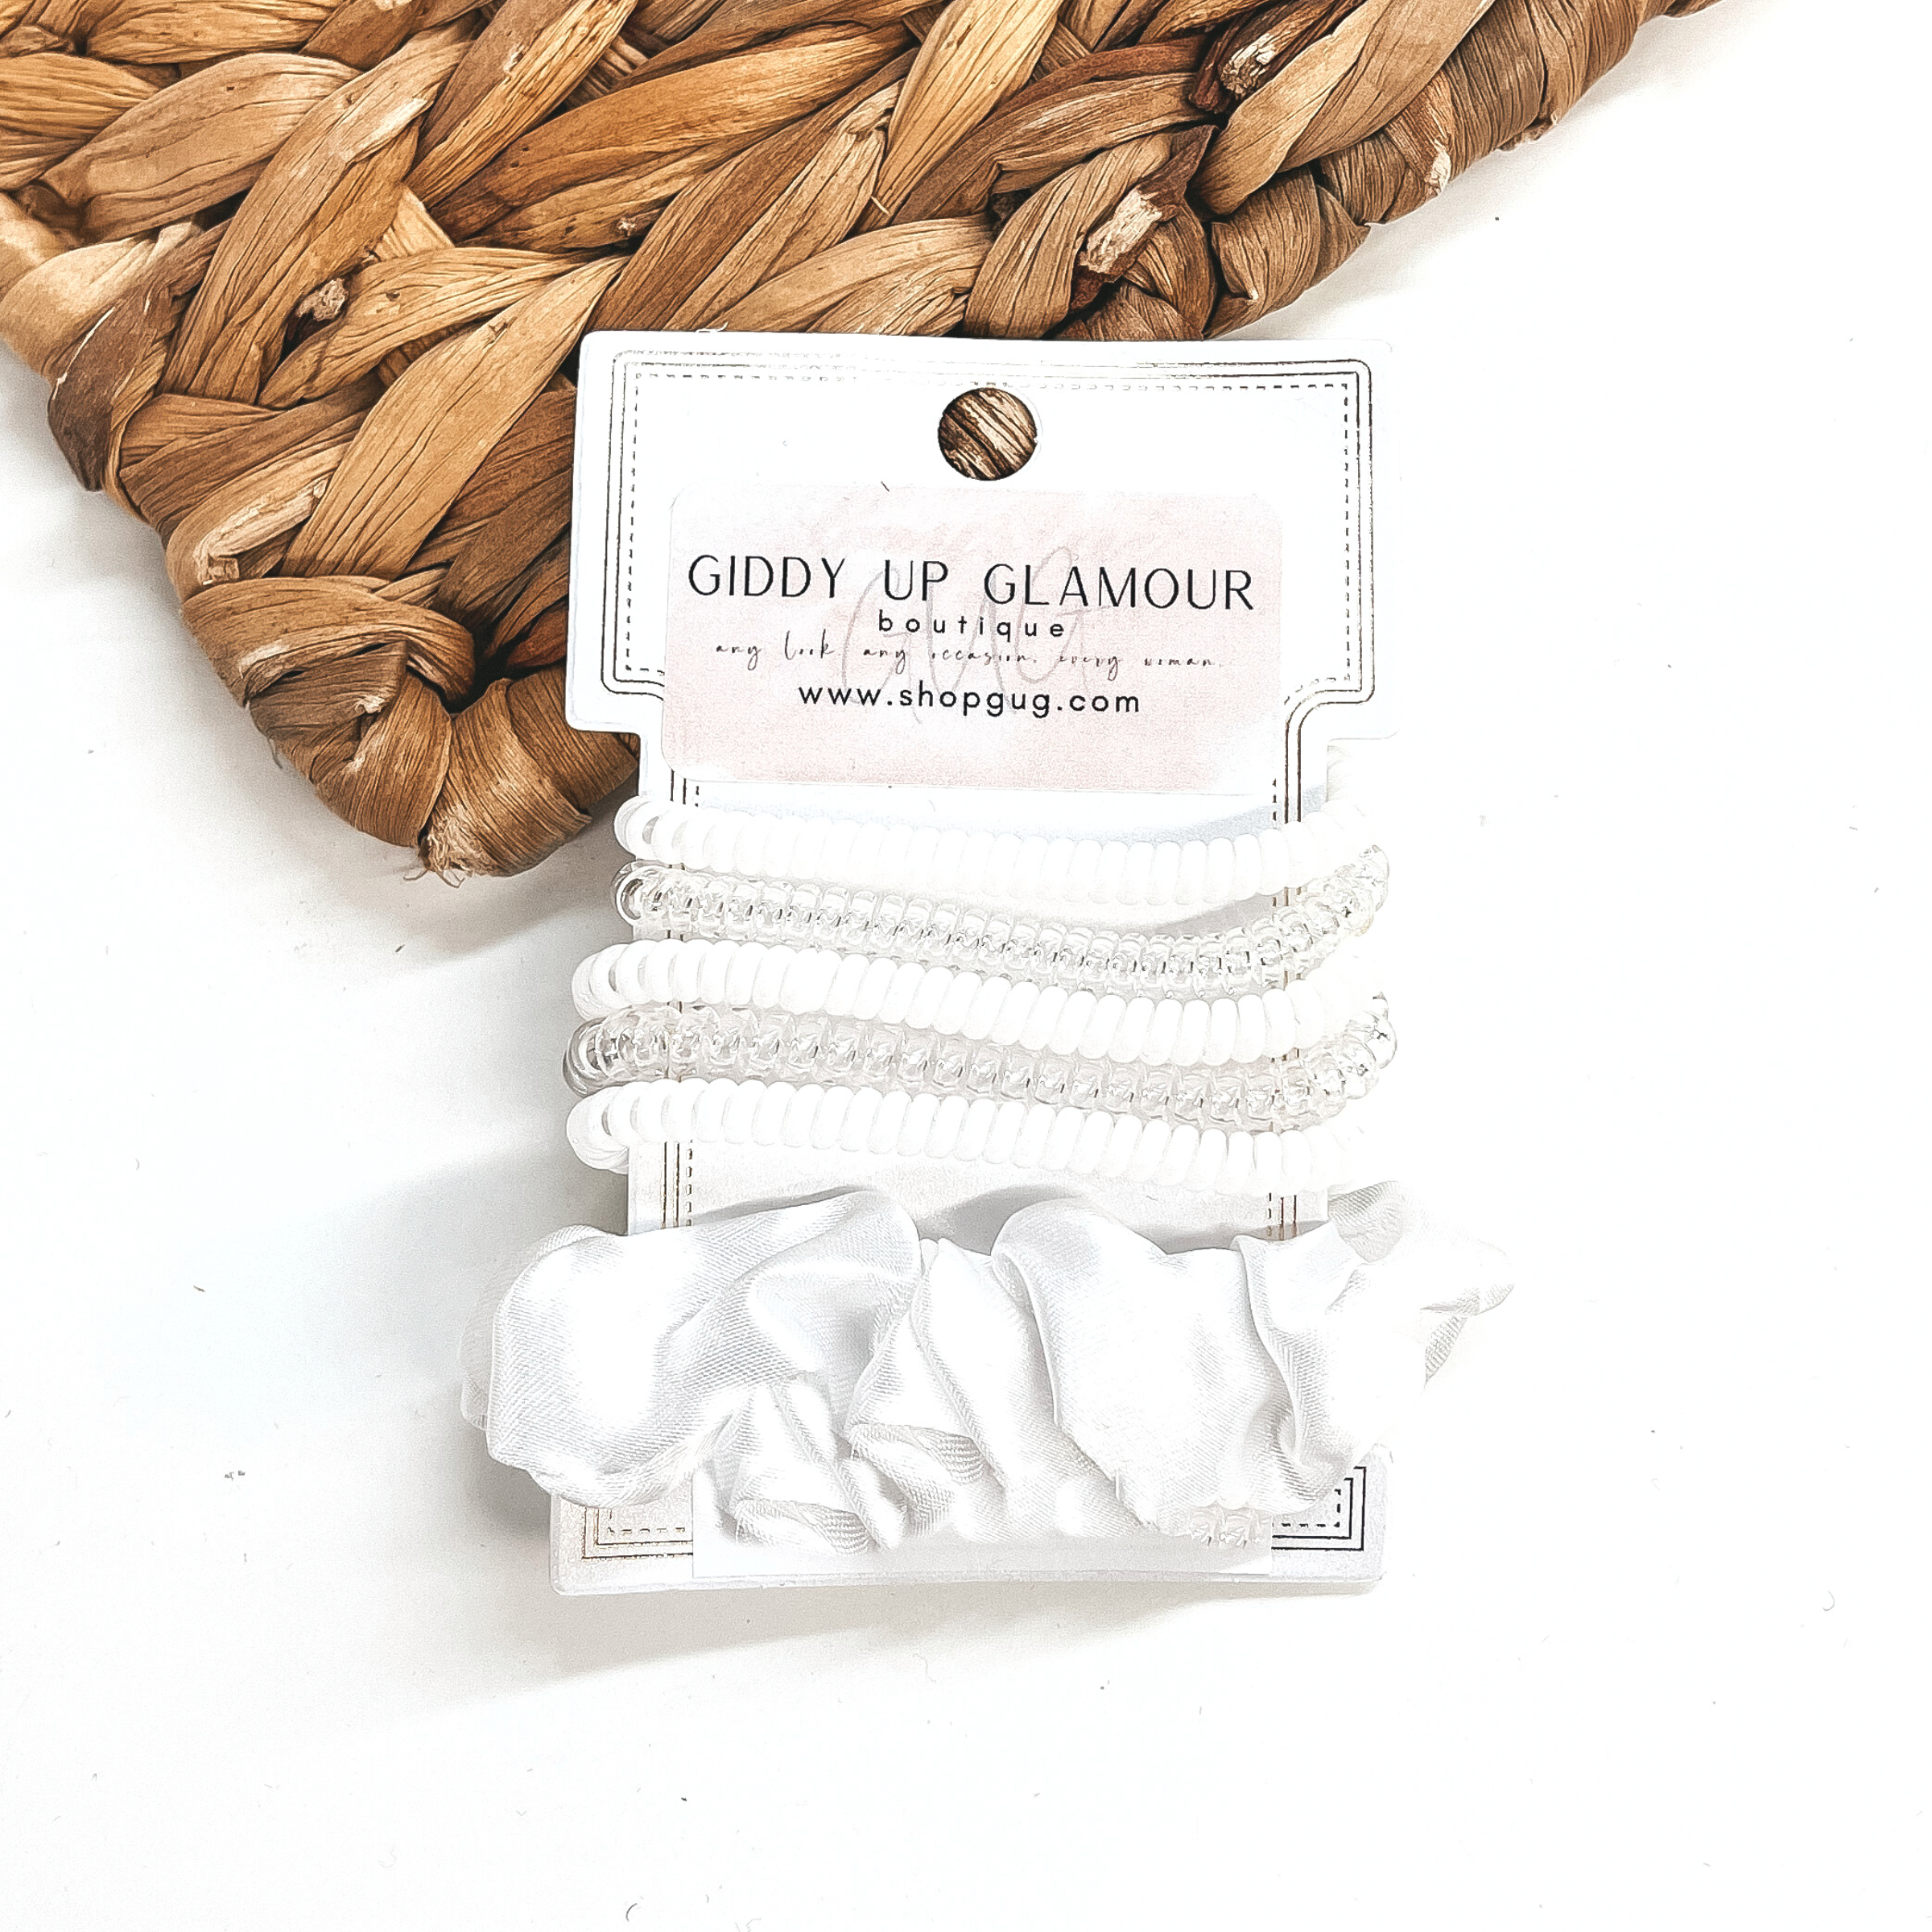 A set of six hair ties, five spiral and one satin scrunchie in white. There are three  solid color spiral hair ties and two transparent. These hair ties are on a white  cardboard piece with a Giddy Up Glamour logo, they are leaned up against a brown woven  plate and a white background.